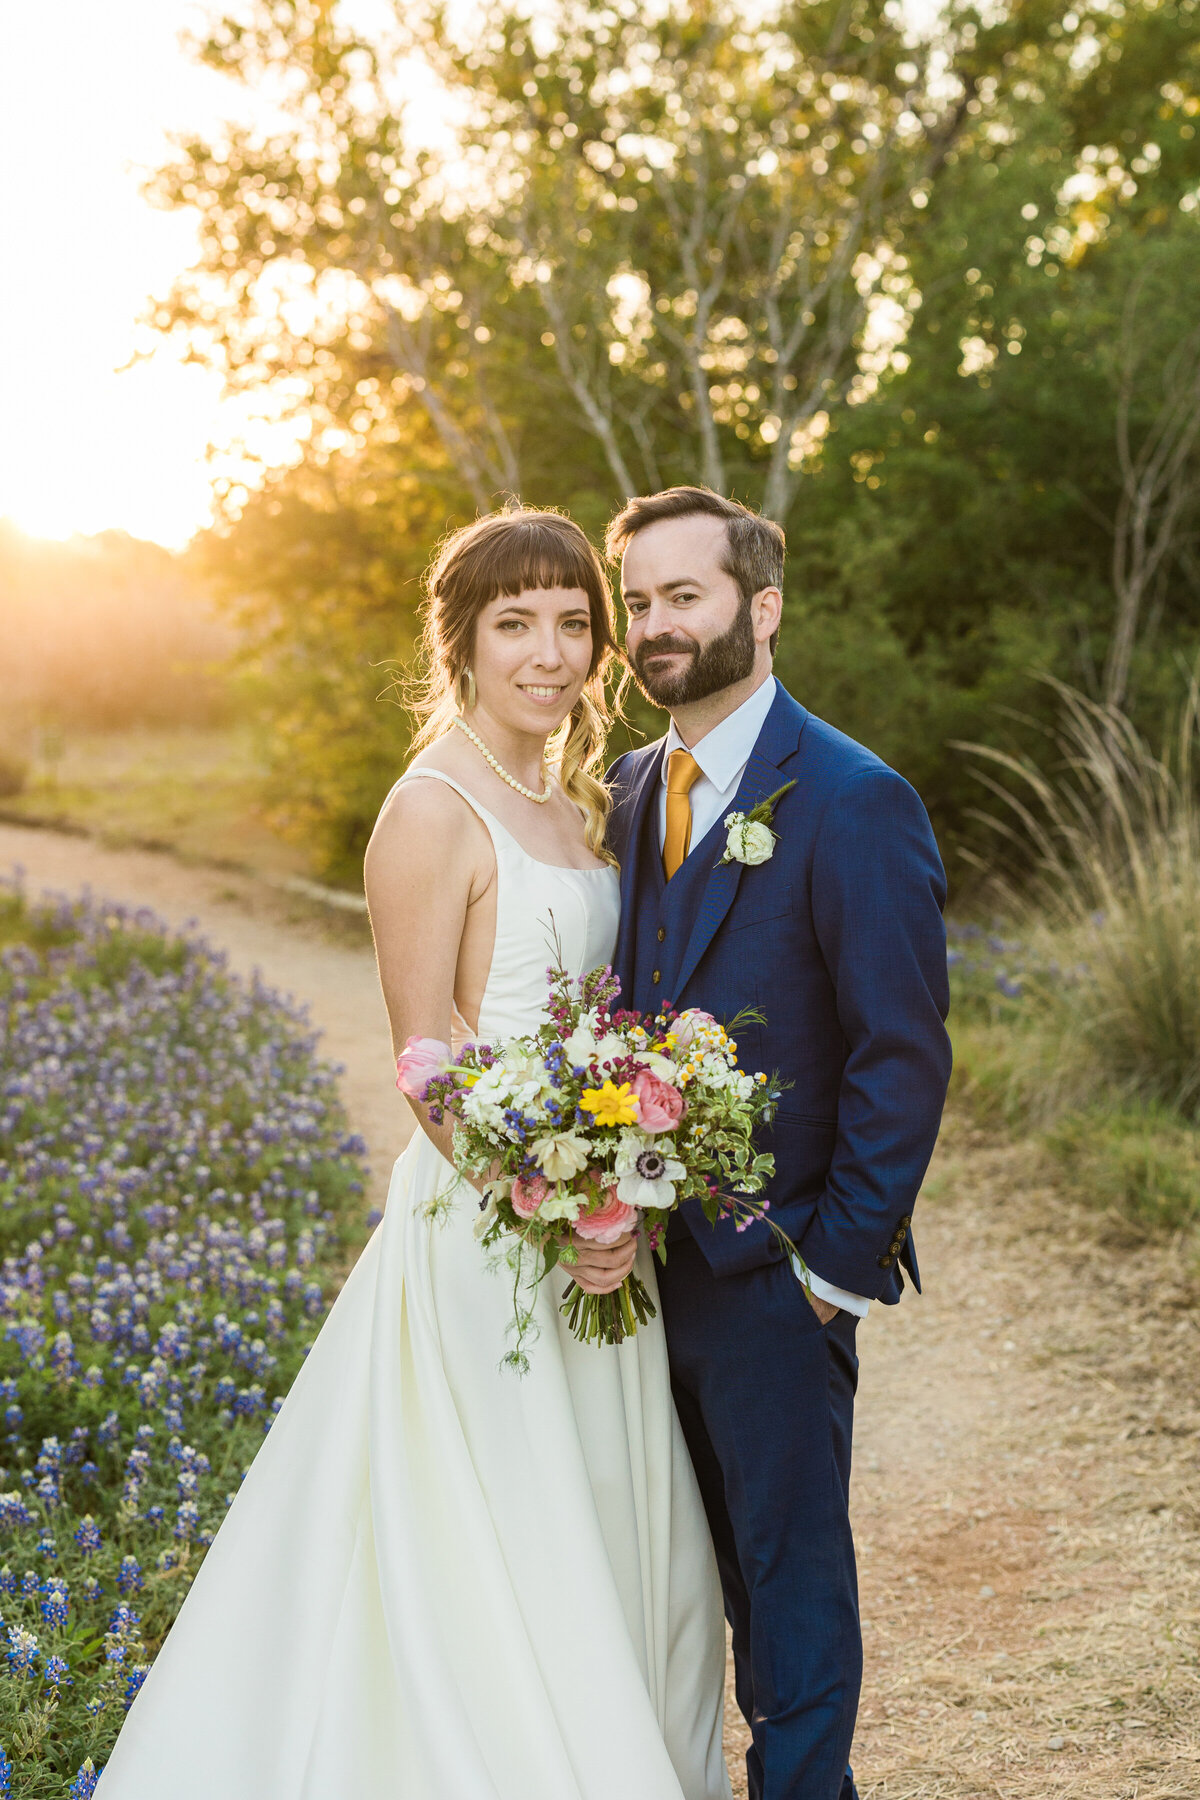 Portrait of a bride and groom at golden hour after their wedding ceremony at the Lady Bird Johnson Wildflower Center in Austin, Texas. The couples stands on a nature trail with many trees on one side and many bluebonnets on the other. The bride is on the left and is wearing a sleeveless, elegant, white dress and is holding a bouquet. The groom is on the right and is wearing a navy suit with an orange tie and boutonniere.